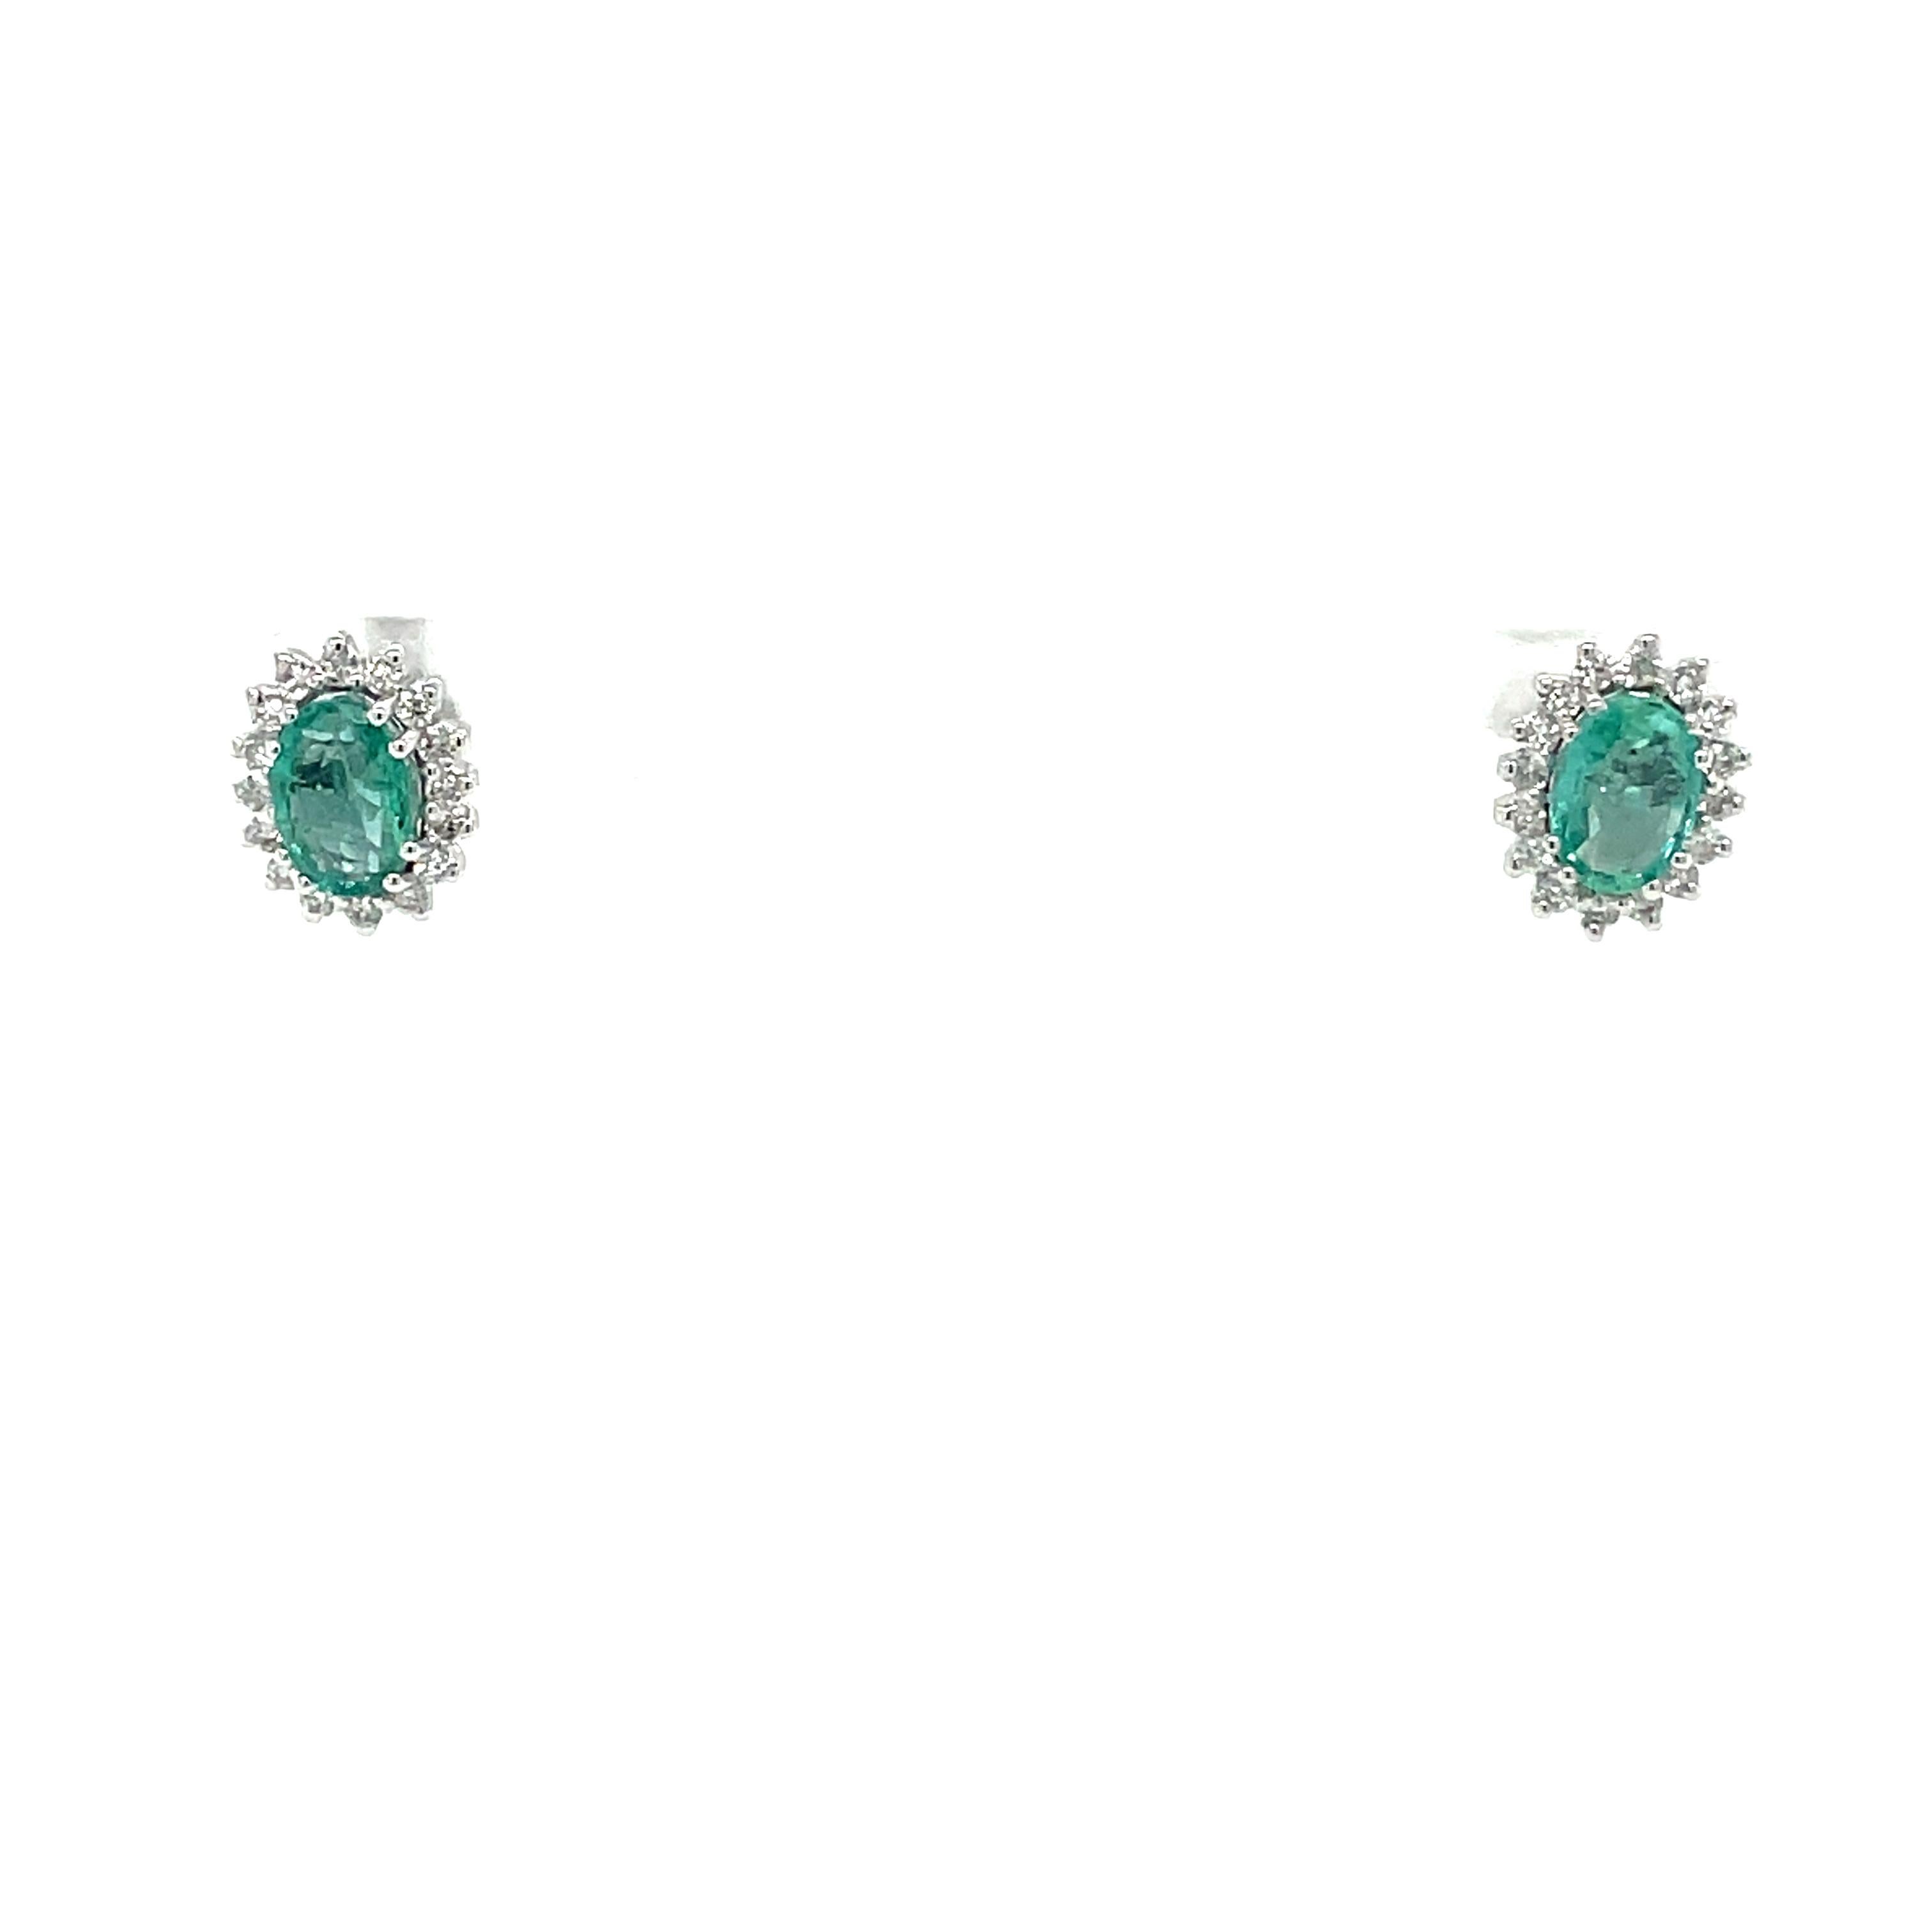 Gorgeous pair of vintage Emerald diamond cluster earrings handcrafted in solid 18k white Gold. 

They are set with Bright Natural Emeralds in the center, total weight 0.80 carat, and surrounded by an halo of colorless sparkling Round Brilliant cut